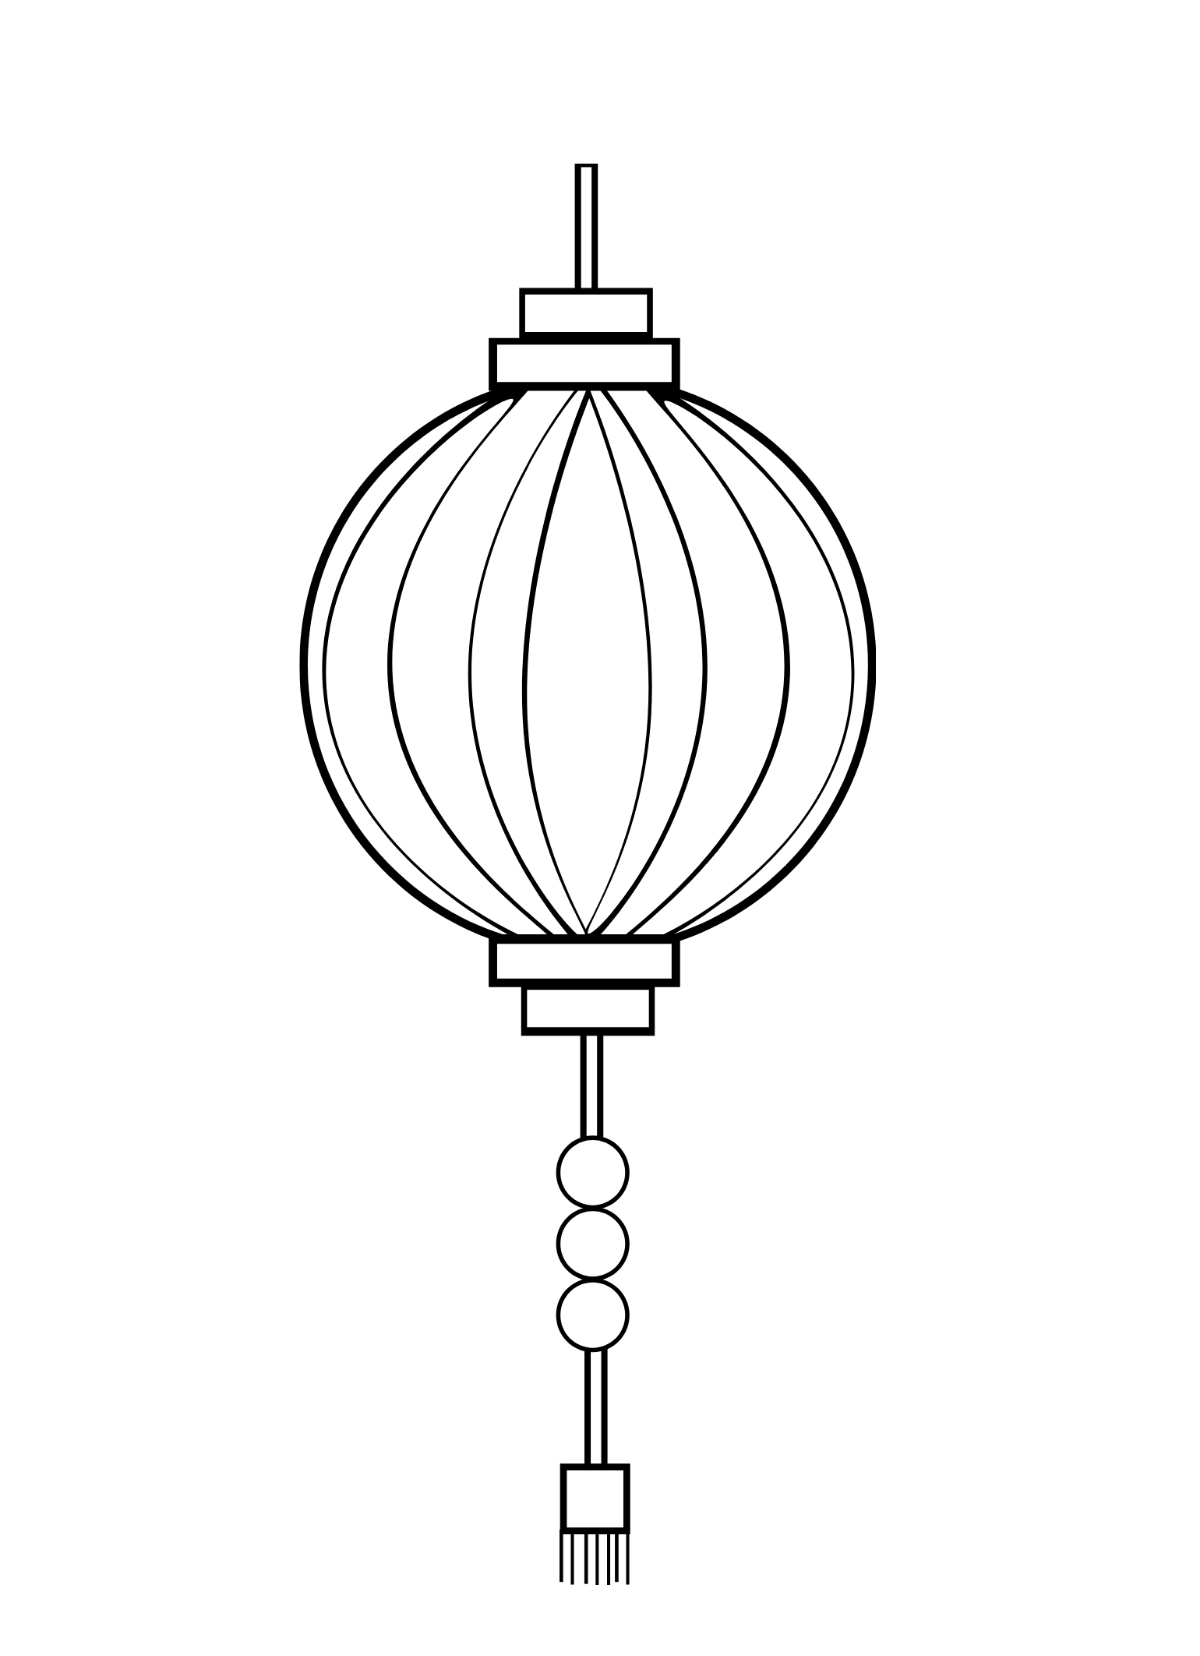 Festival of Lights Drawing Template